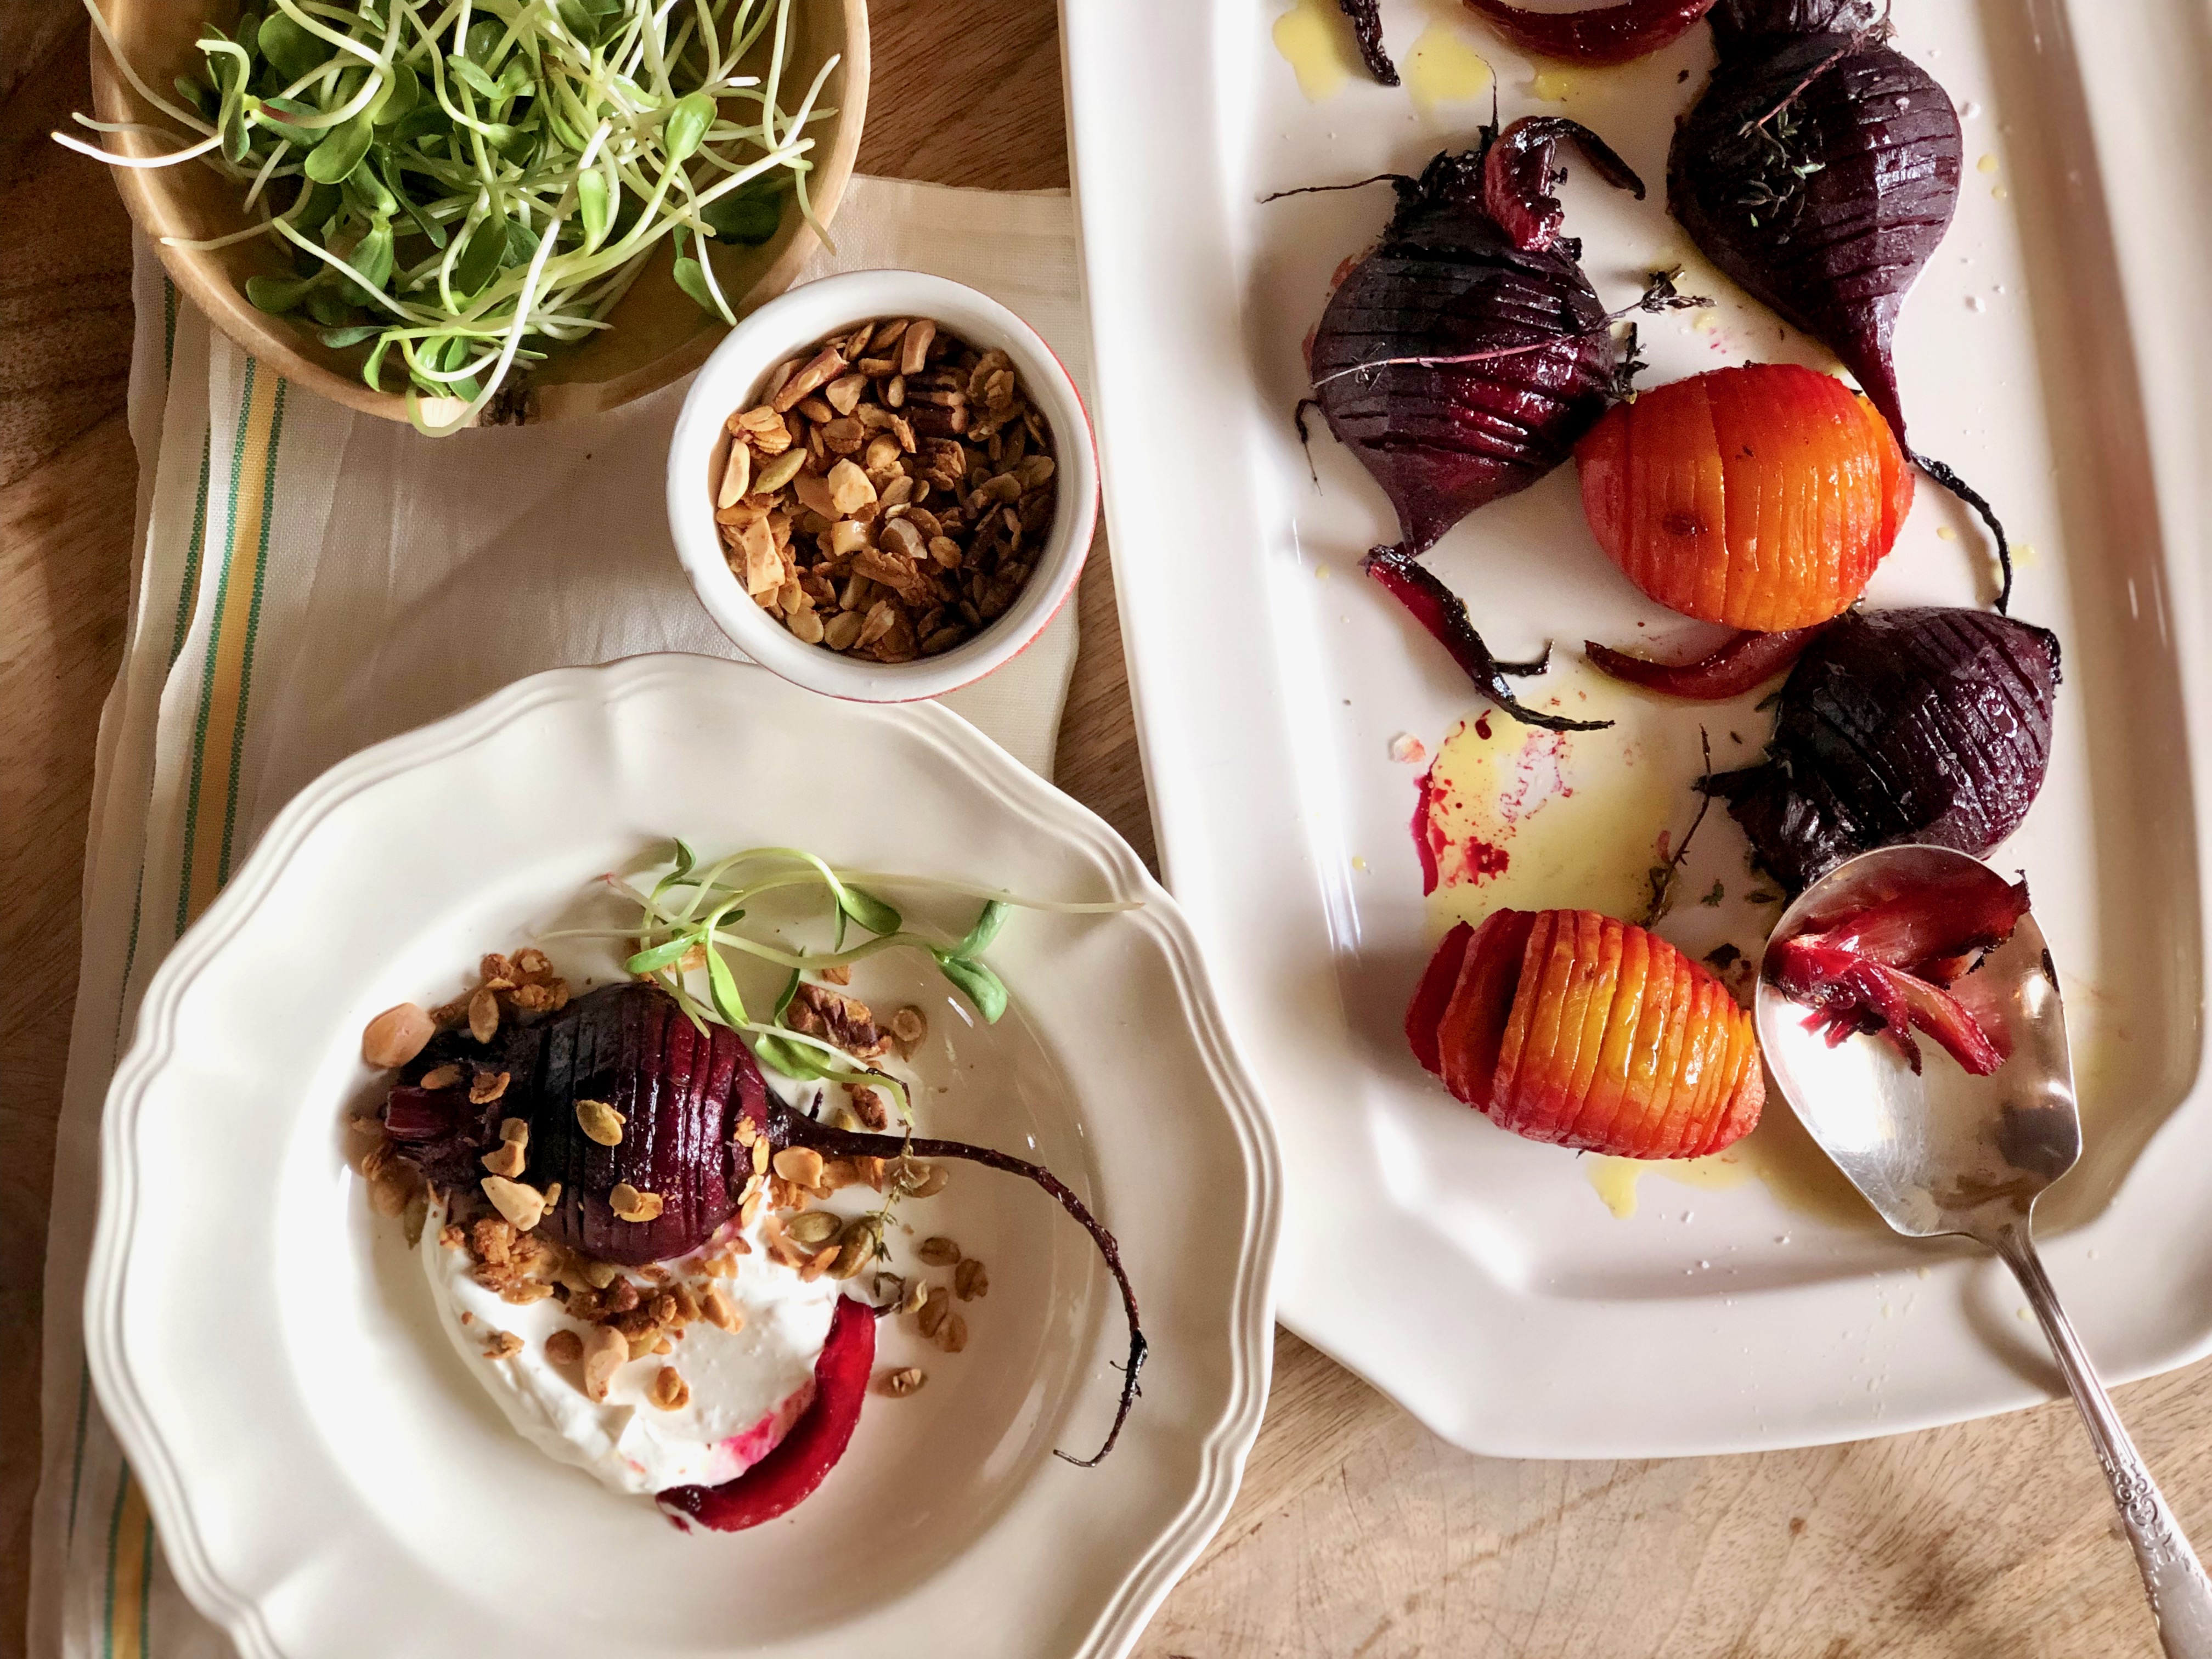 Featured image for “Hasselback Beets with Savory Granola and Orange Horseradish Cream”